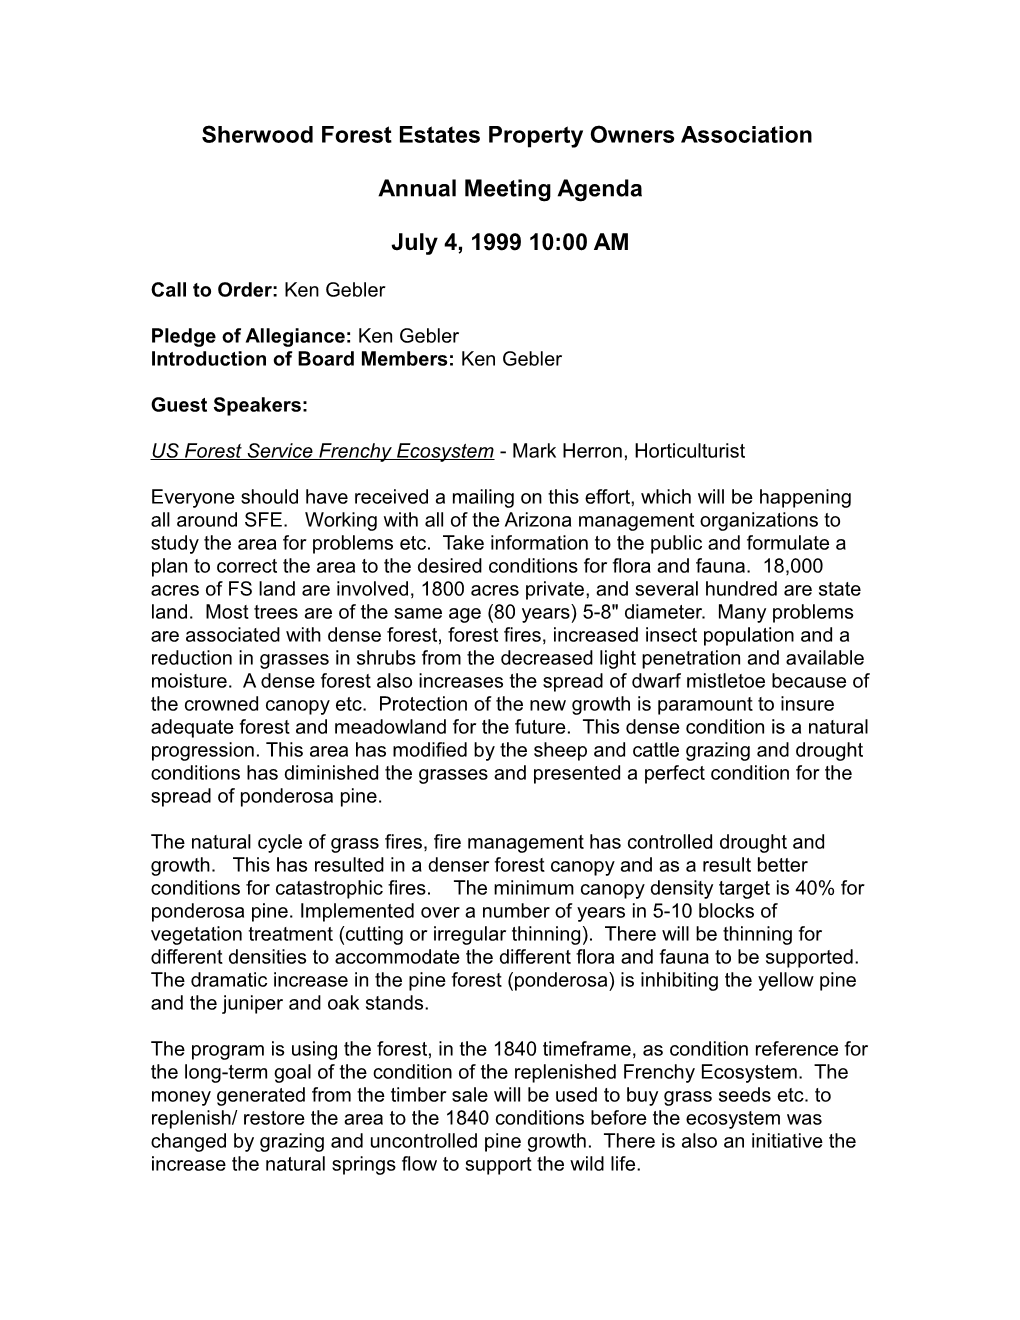 Sherwood Forest Estates Property Owners Asscociation Annual Meeting Agenda